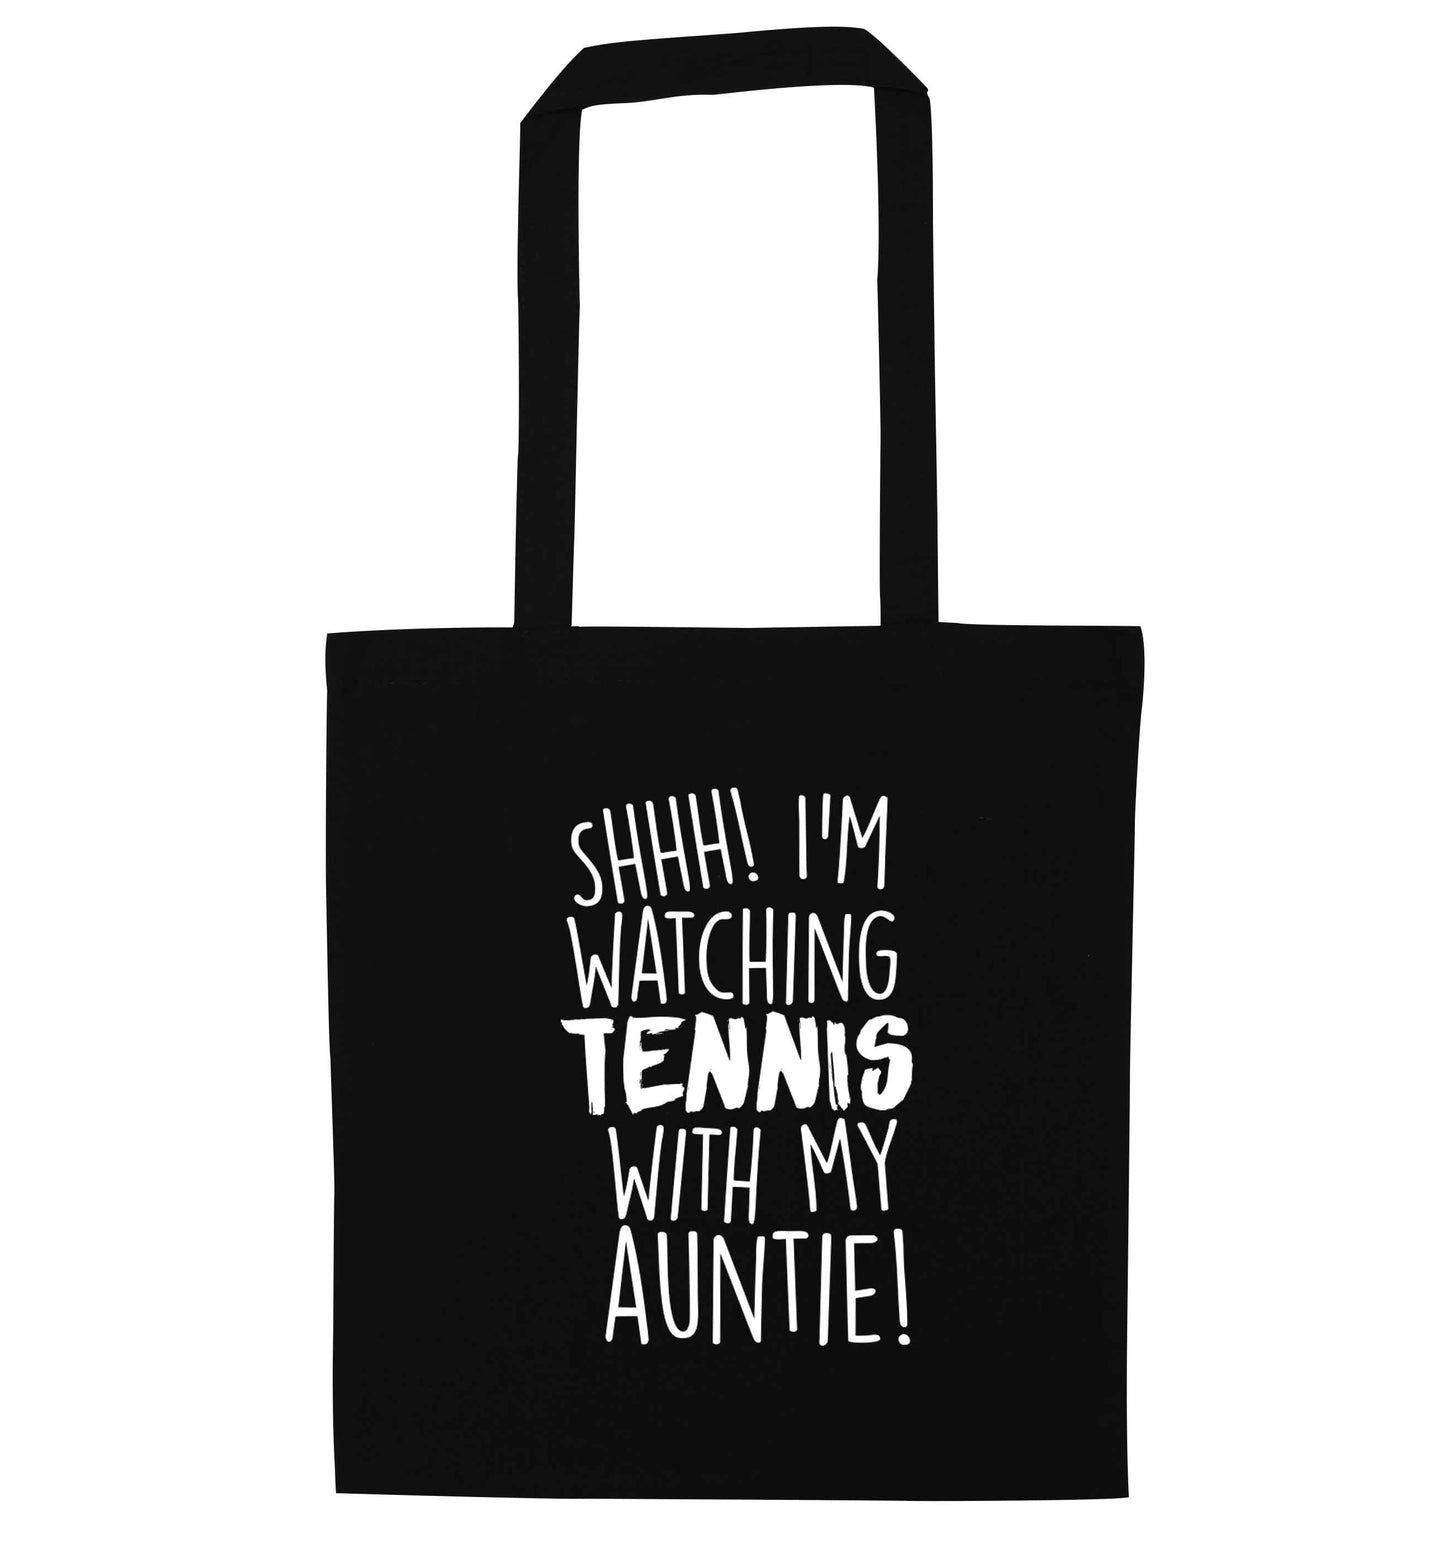 Shh! I'm watching tennis with my auntie! black tote bag